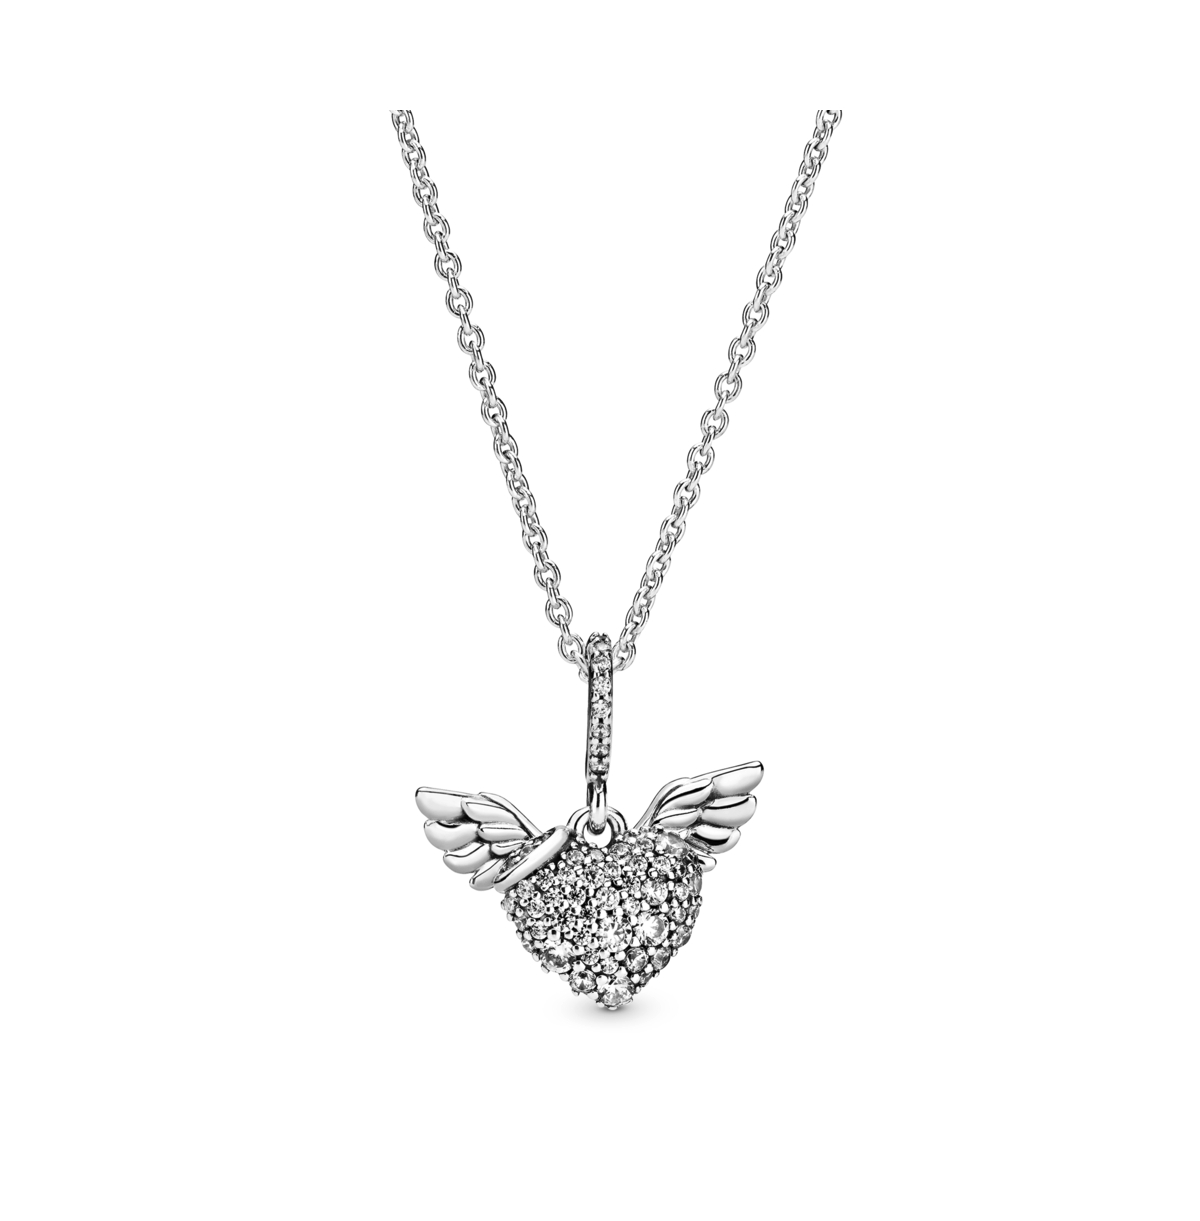 Moment Sterling Silver Pave Cubic Zirconia Heart And Angel Wings Necklace - Silver